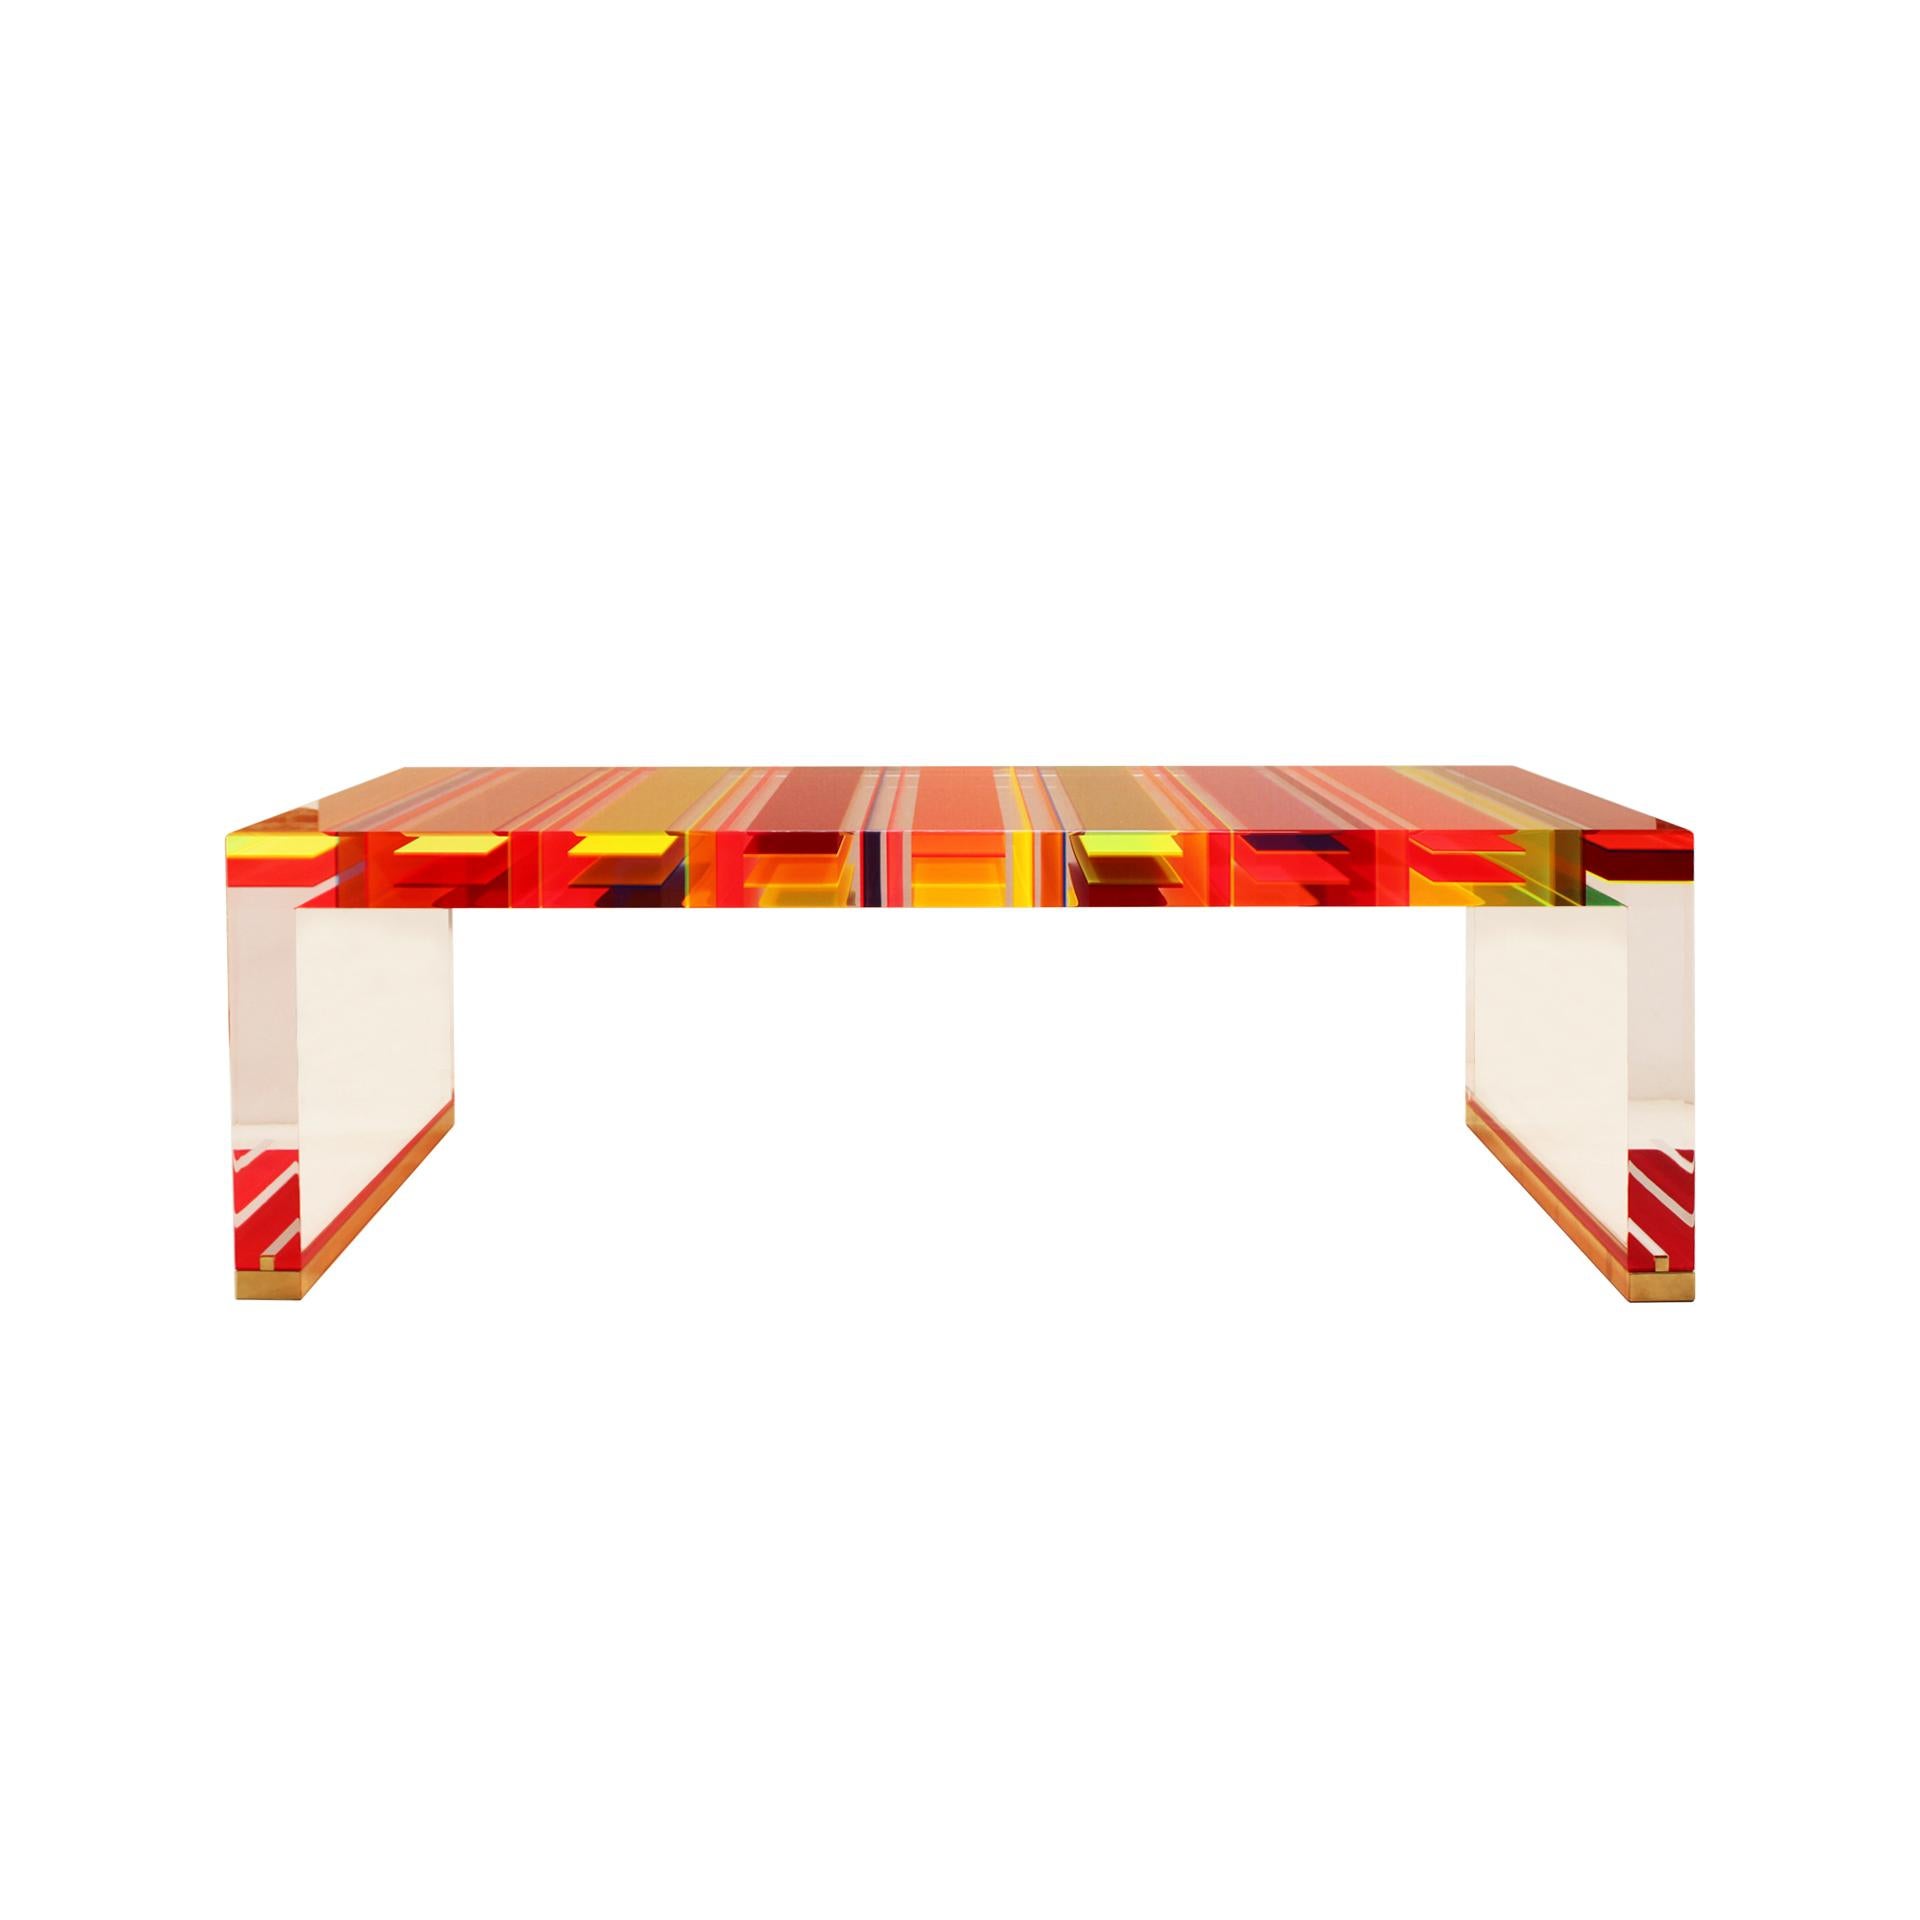 Rectangular coffee table designed by Milanese Studio Superego, made in multi-color and transparent plexiglass with seven centimetres thickness and feet of the legs finished in brass.

Superego Studio is a design studio based in Milan, Italy,